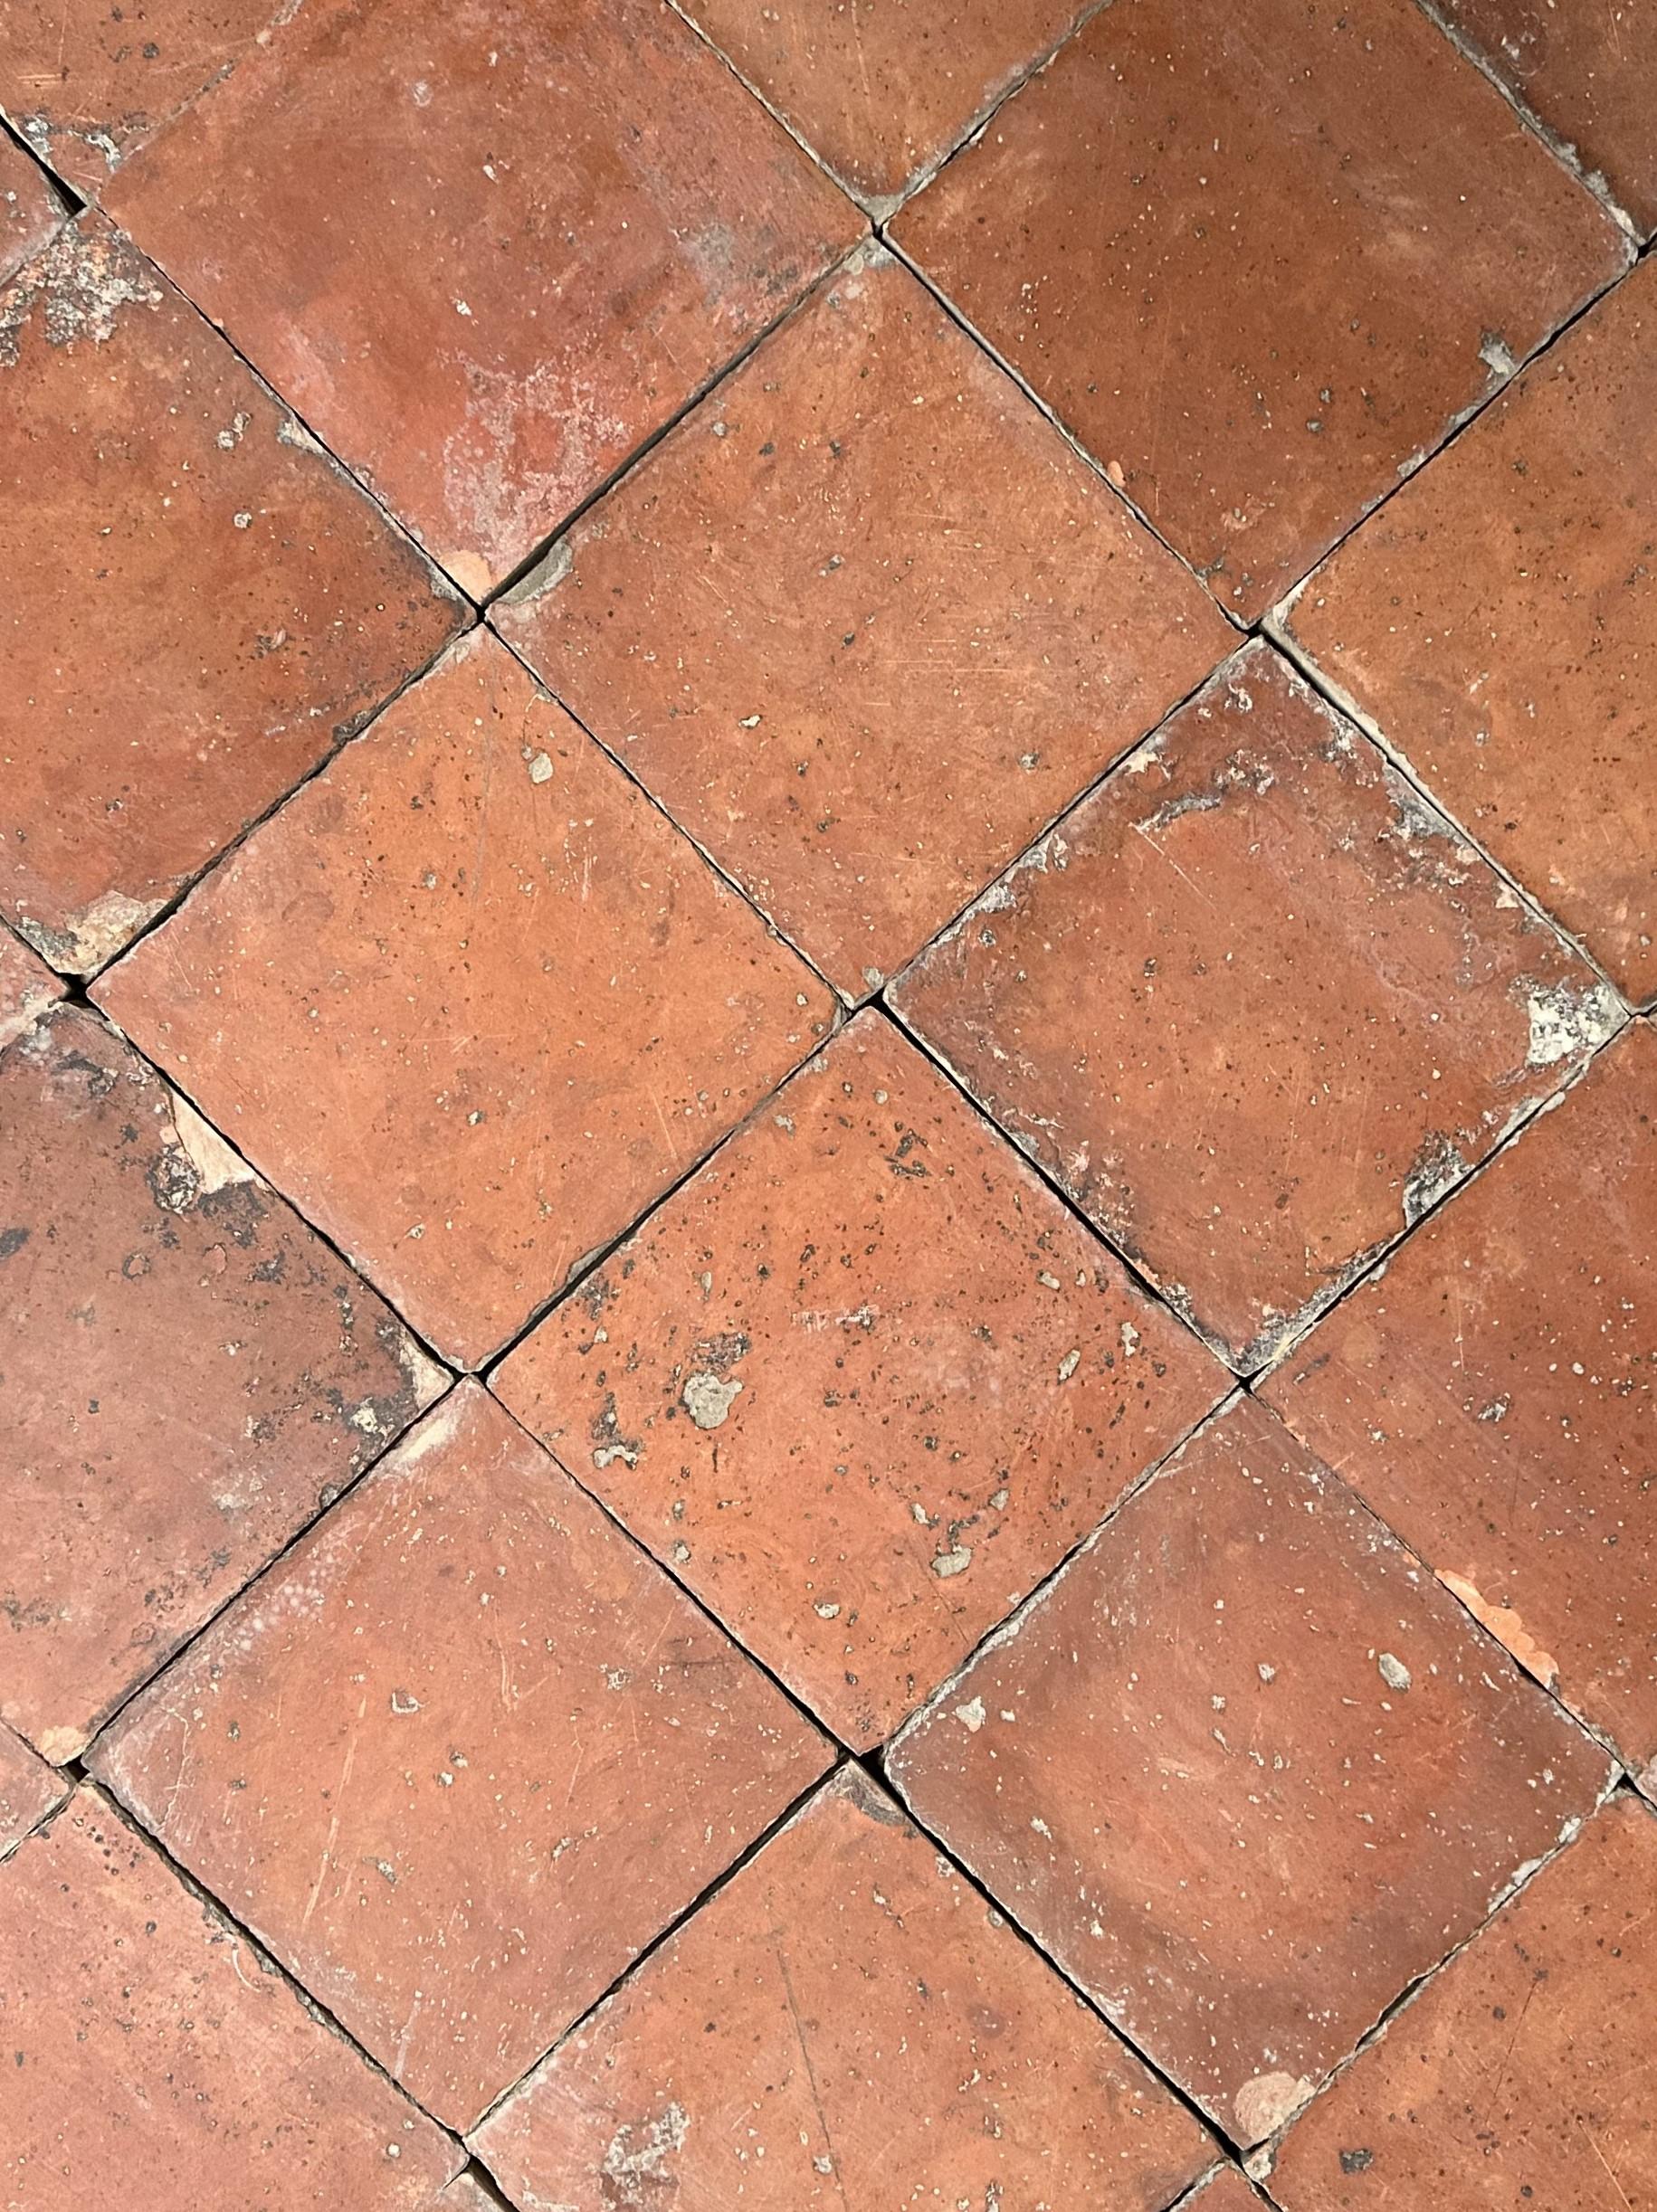 Very please to offer this beautiful large lot of French Terracotta Floor Tiles
This used to be kitchen floor in a mid 19th century Kitchen in the country side of France

These French Terracotta Floor Tiles have retained the perfect patina and